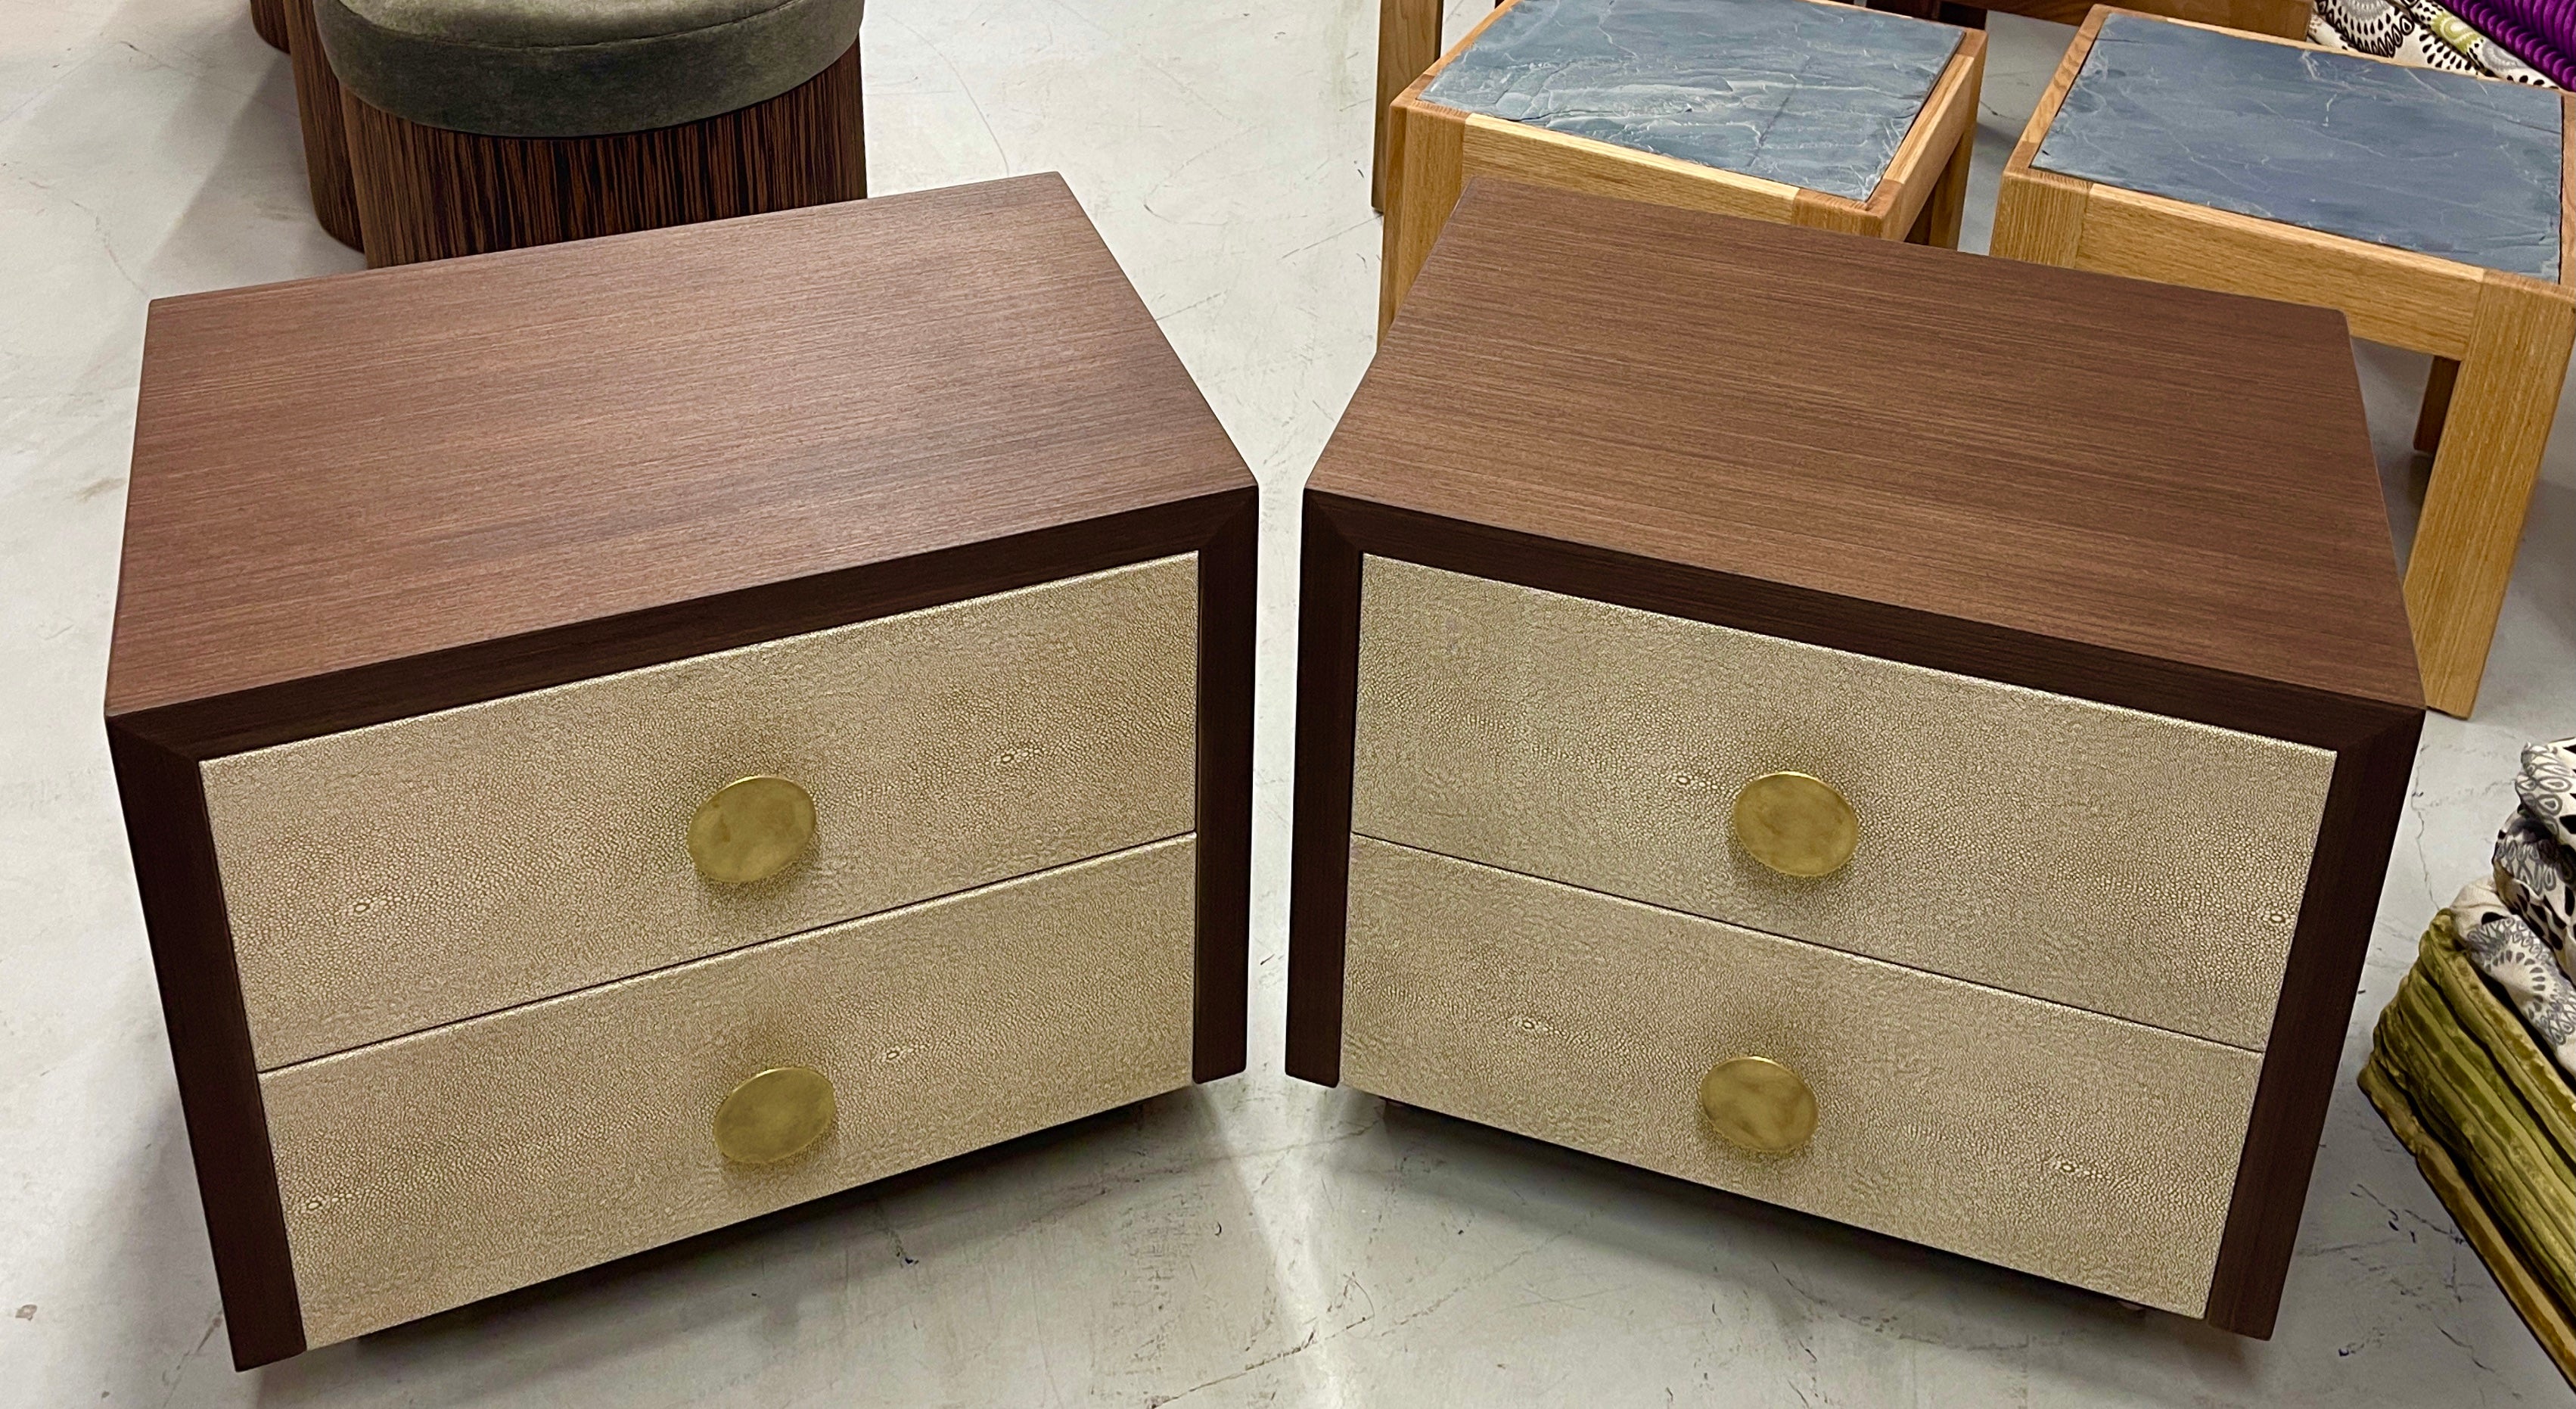 A pretty set of 2 nightstands we had custom made in Wenge veneer with Shagreen Edelman leather drawer fronts. These nightstands are custom made for us by a local Palm Springs artisan. These are available immediately but can be customized into